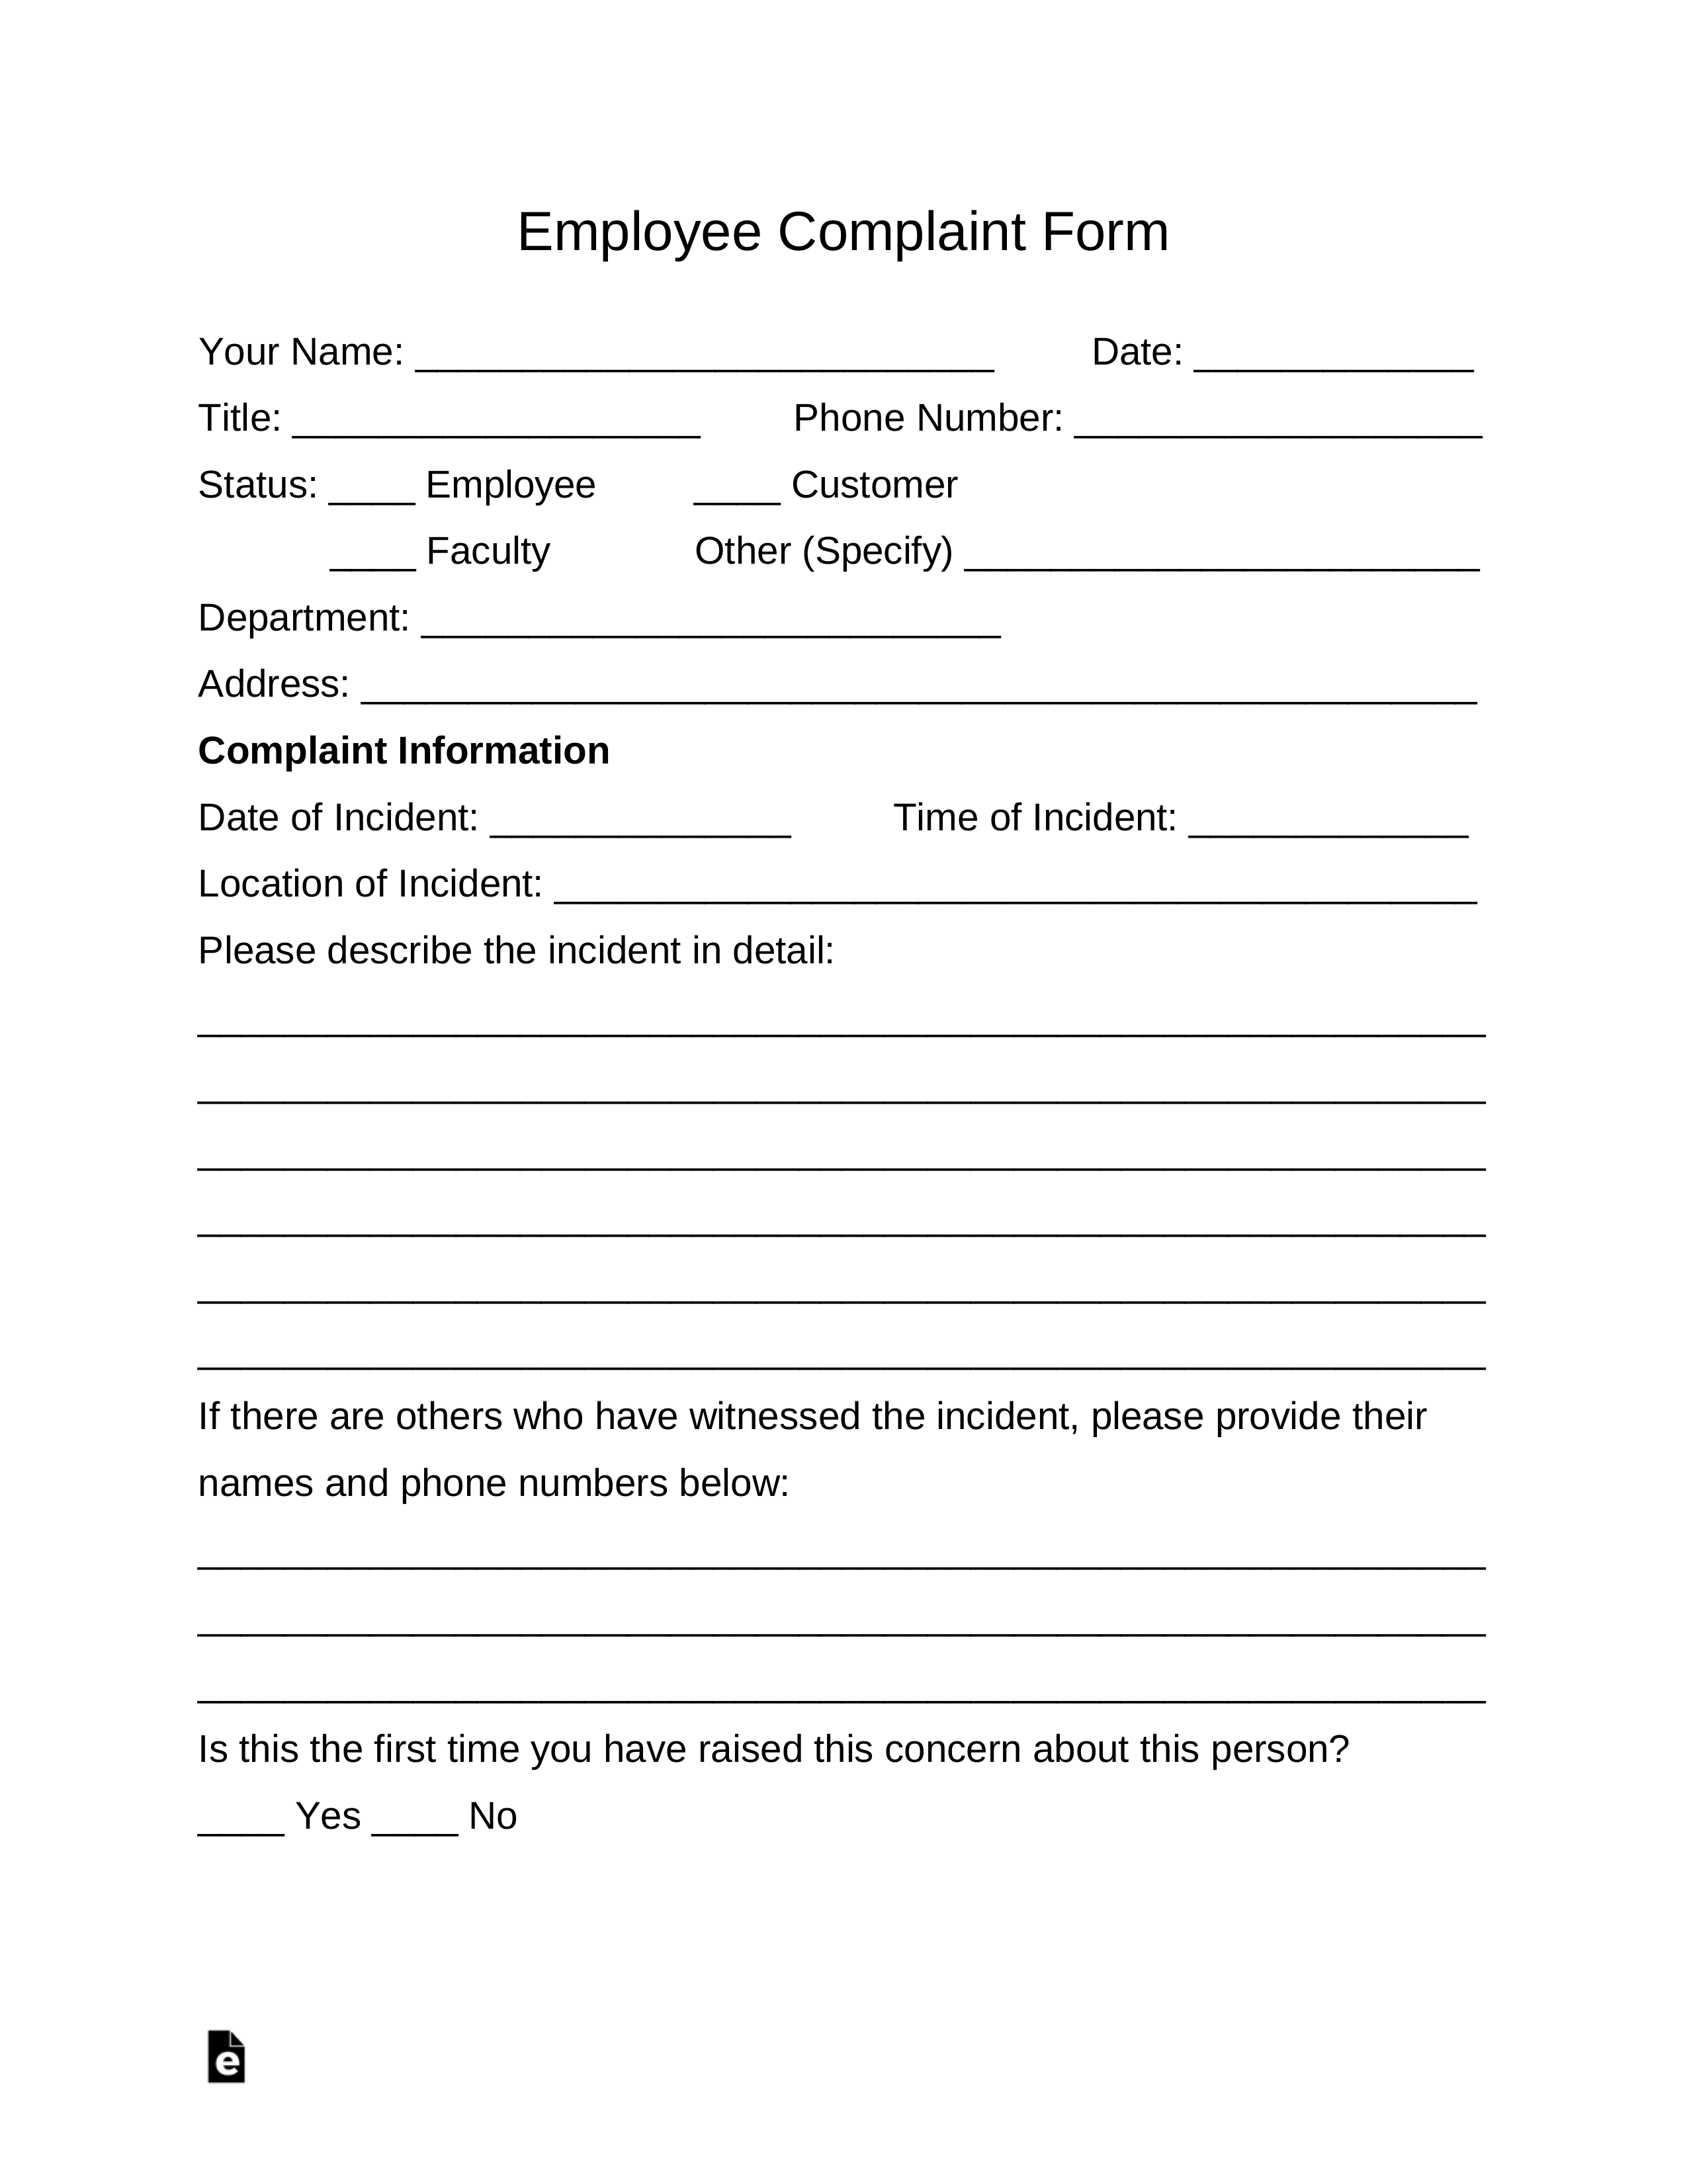 free-employee-complaint-form-pdf-word-eforms